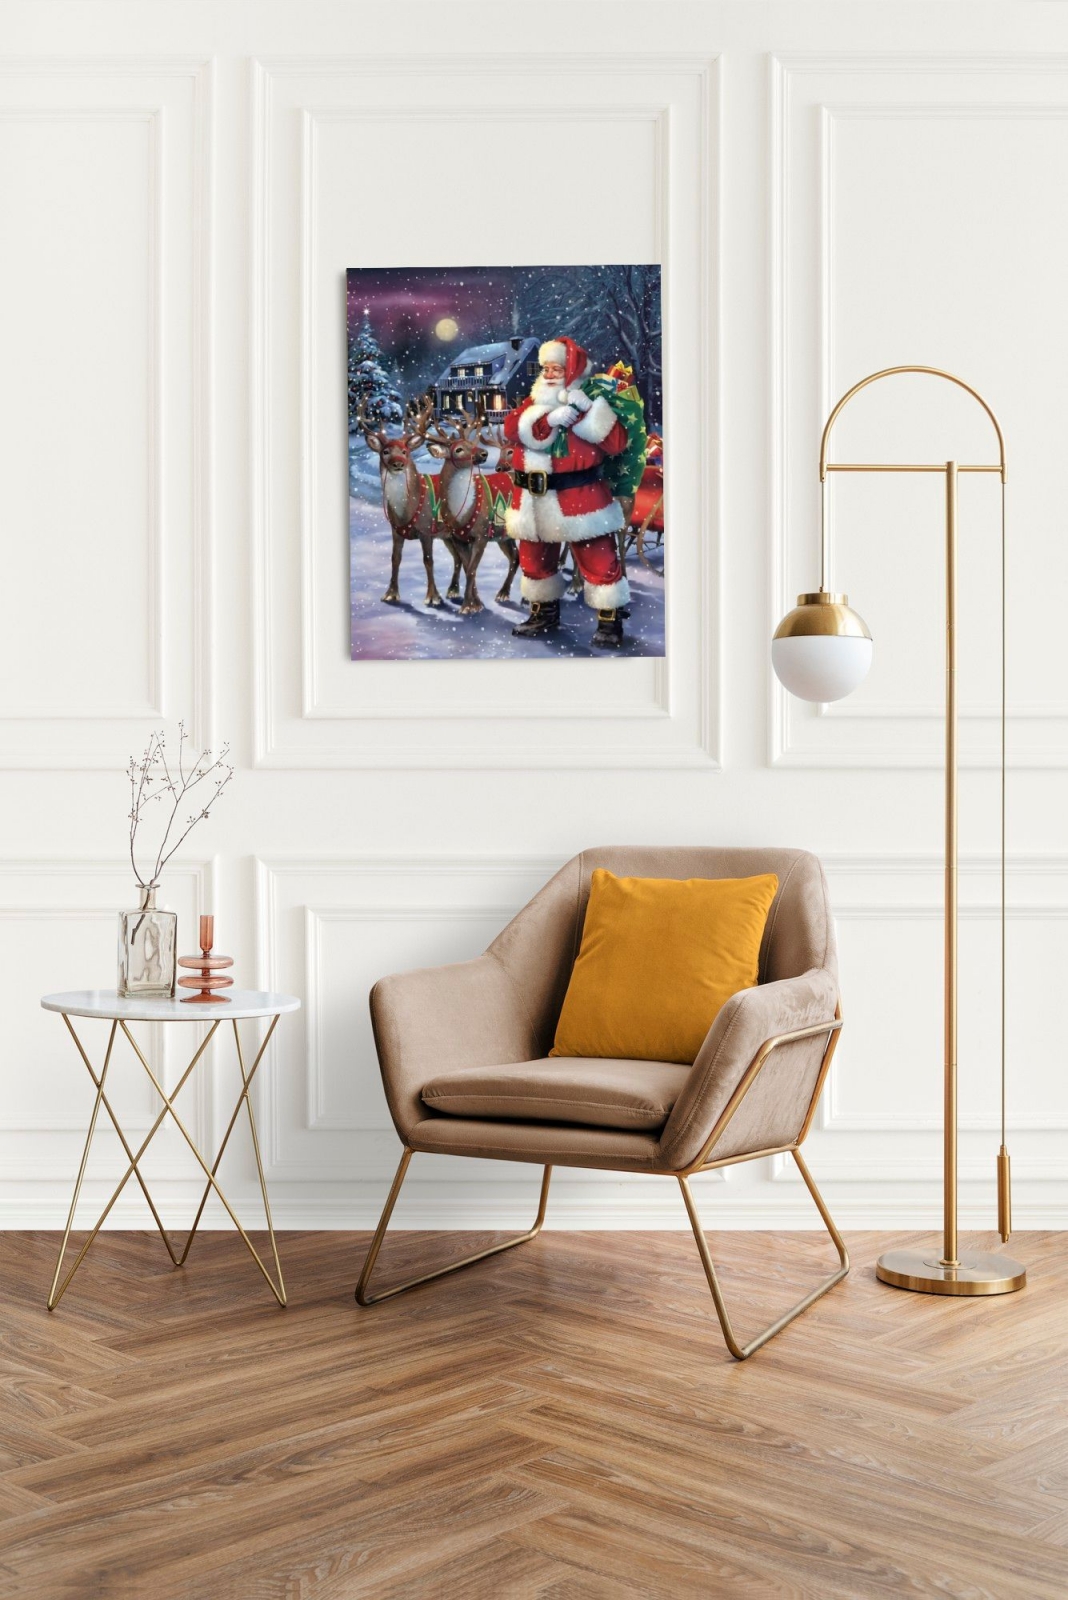 Famous paintings, canvas prints, vintage posters and wall art - ツ  Legendarte - Canvas Print – Santa Claus with Reindeer - Wall Art Decor